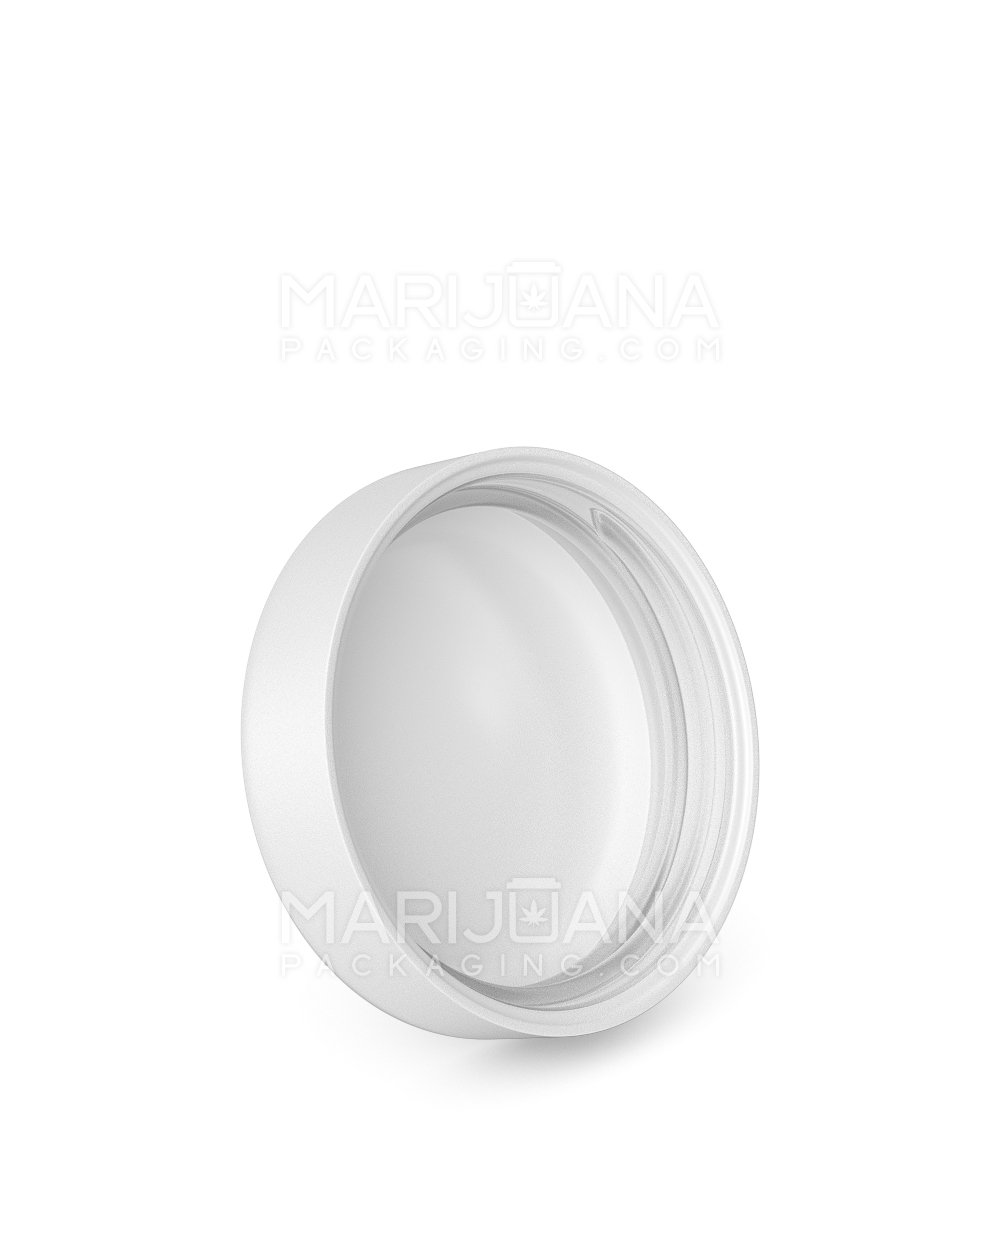 Child Resistant | Smooth Push Down & Turn Plastic Caps w/ Foam Liner | 53mm - Matte White - 120 Count - 2